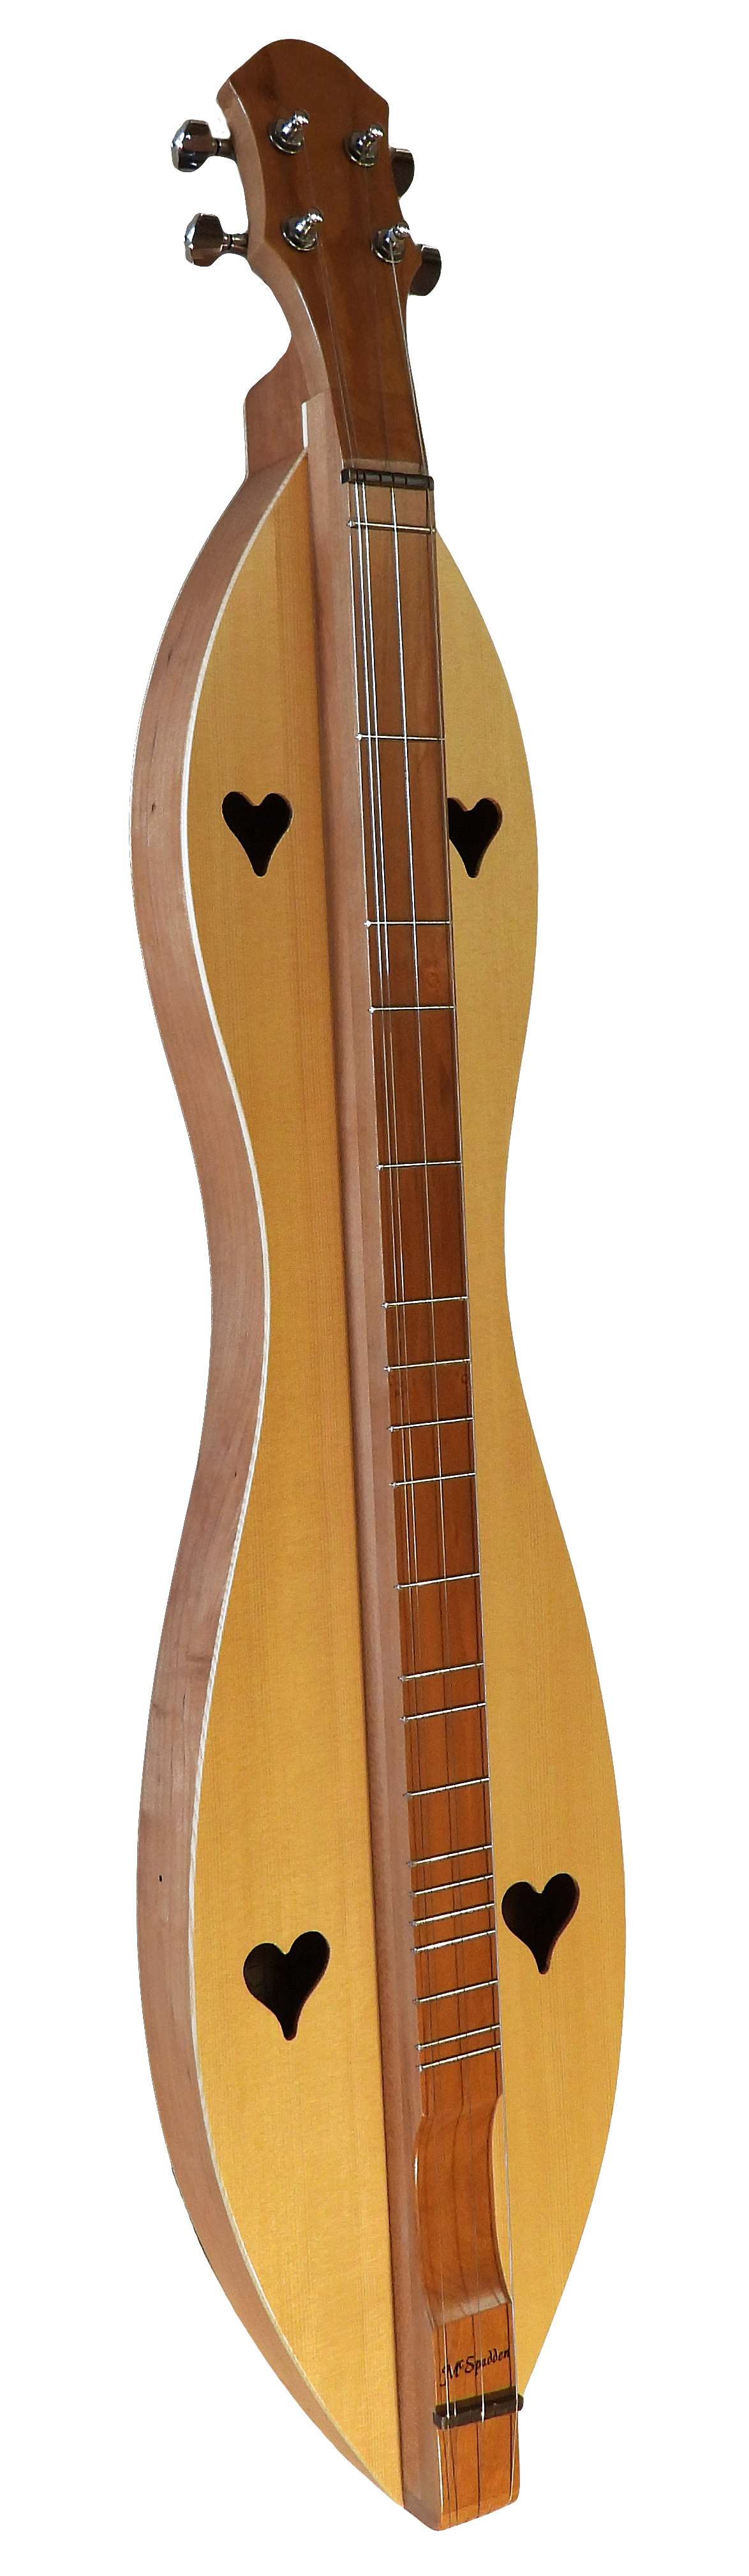 4 String, Flathead, Hourglass with Cherry back, sides and Spruce top. (4FH26CS)